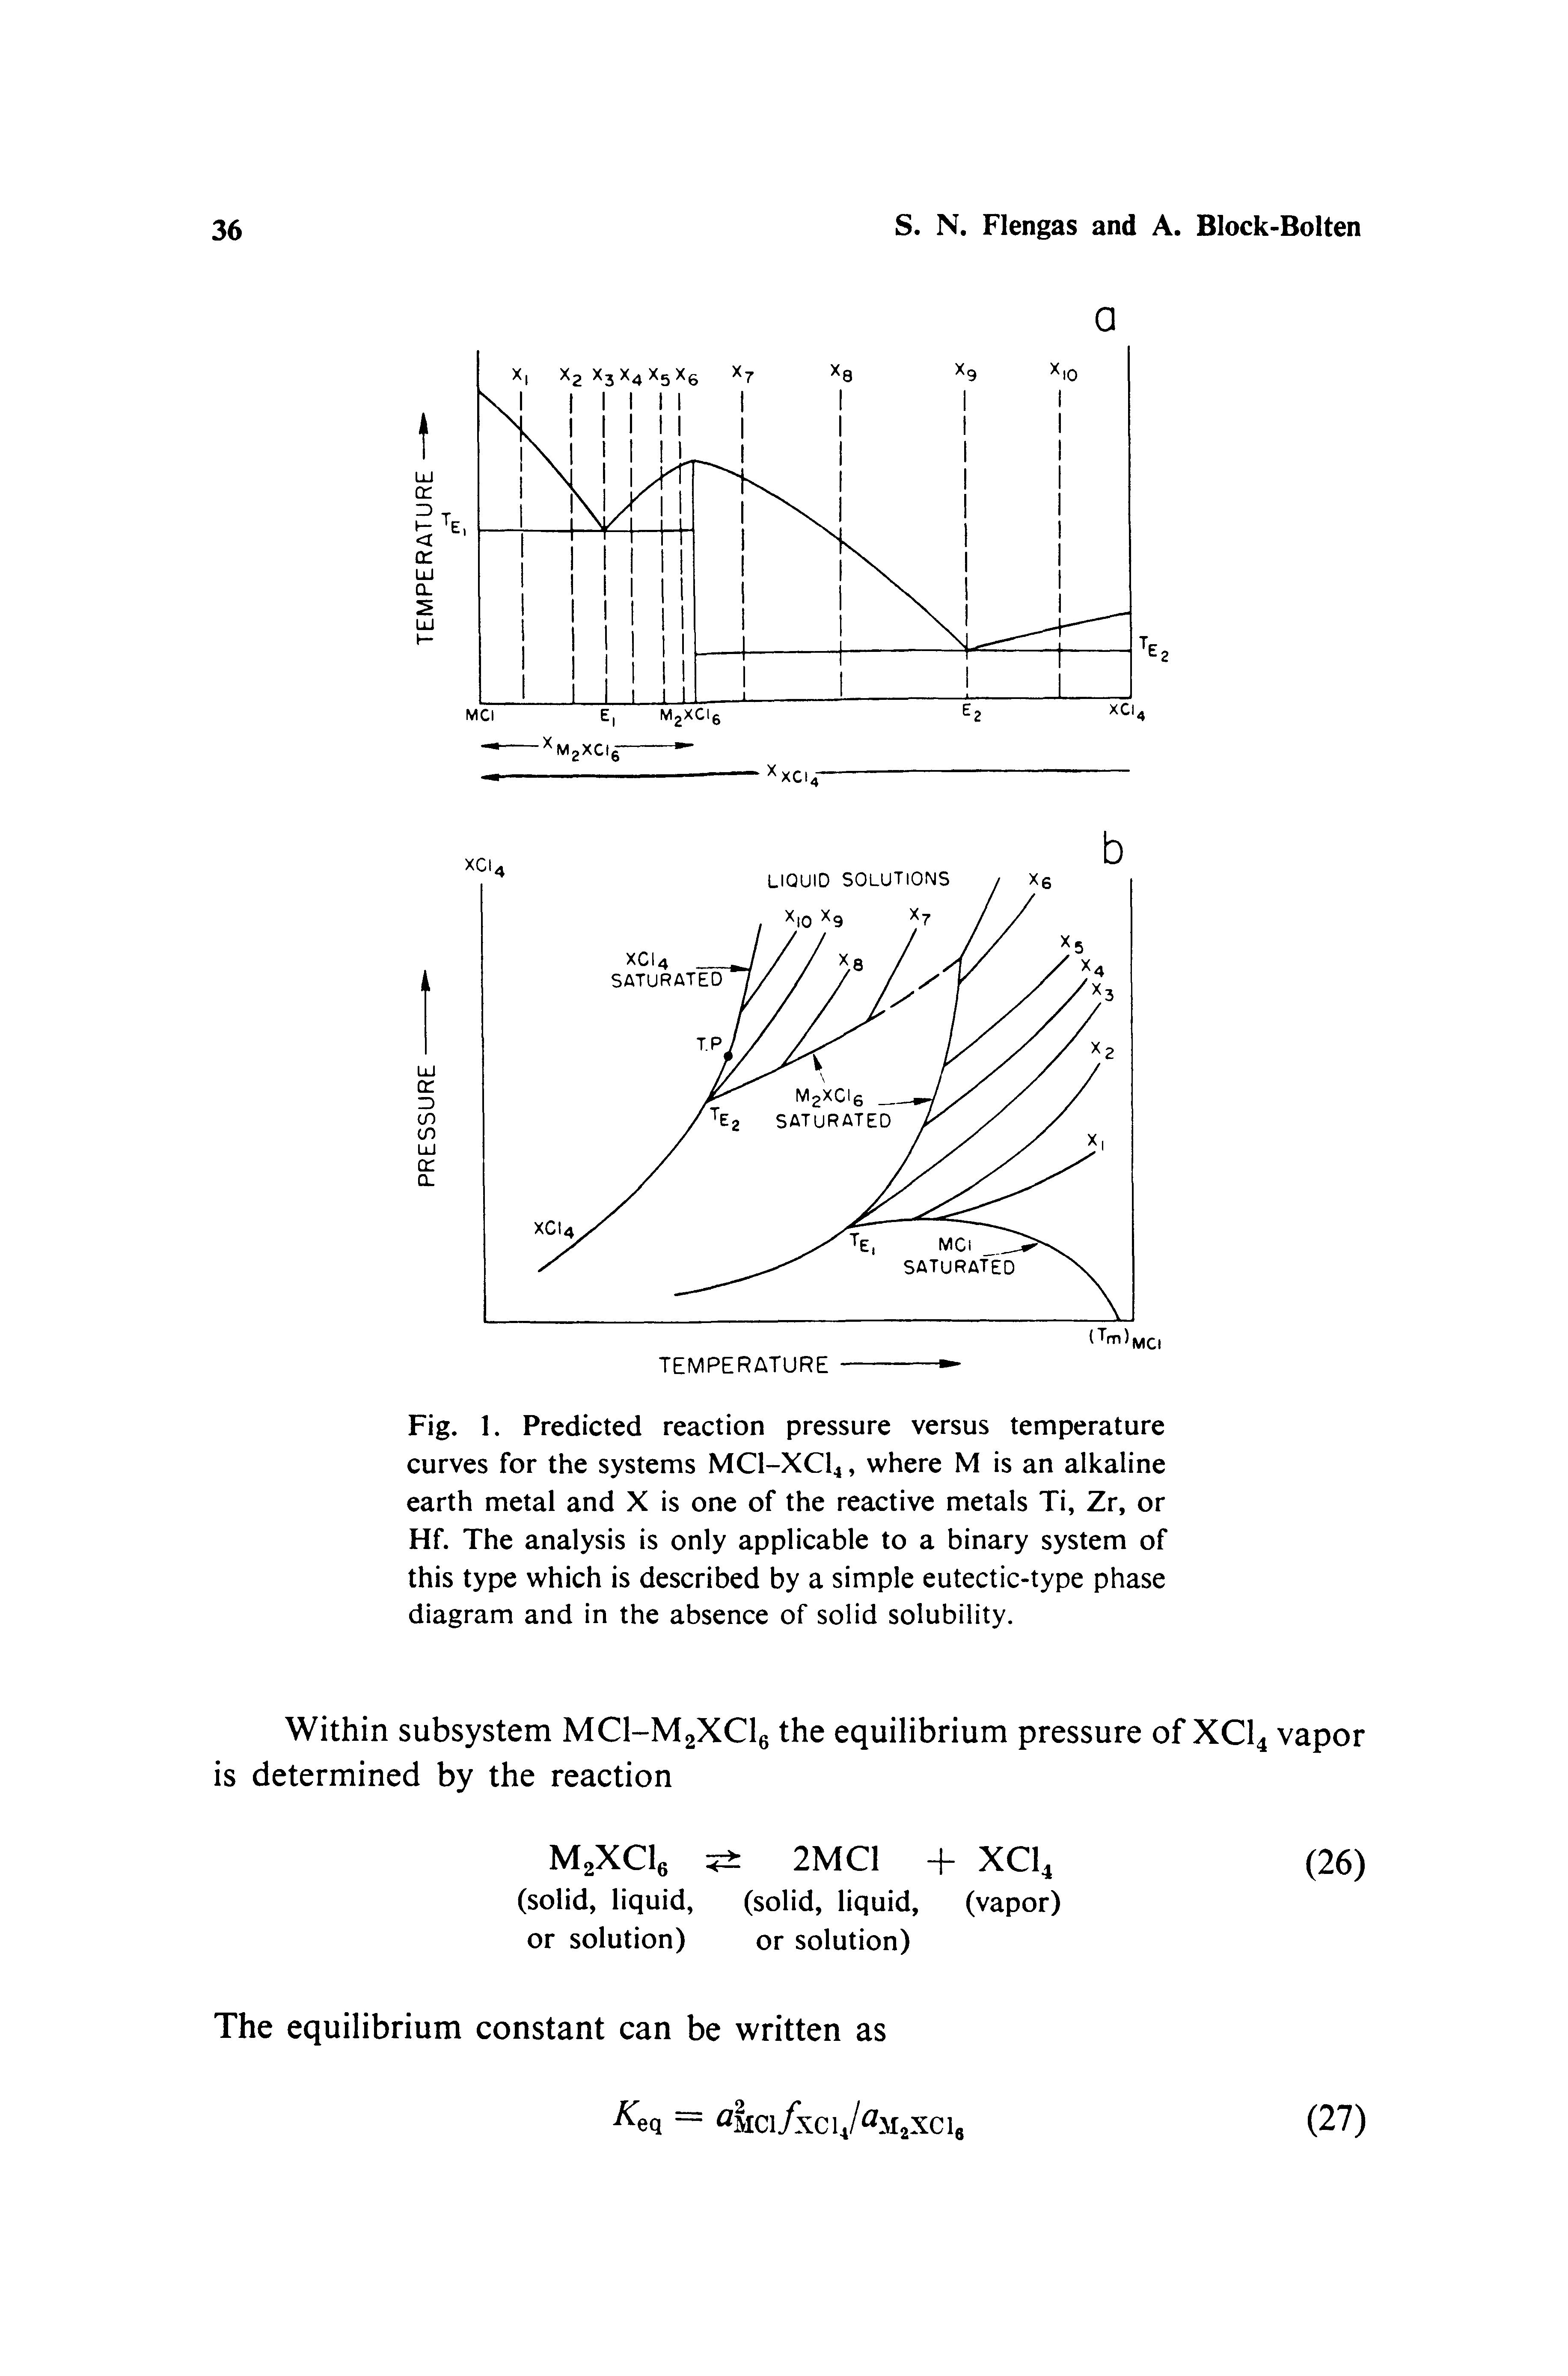 Fig. 1. Predicted reaction pressure versus temperature curves for the systems MCI-XCI4, where M is an alkaline earth metal and X is one of the reactive metals Ti, Zr, or Hf. The analysis is only applicable to a binary system of this type which is described by a simple eutectic-type phase diagram and in the absence of solid solubility.